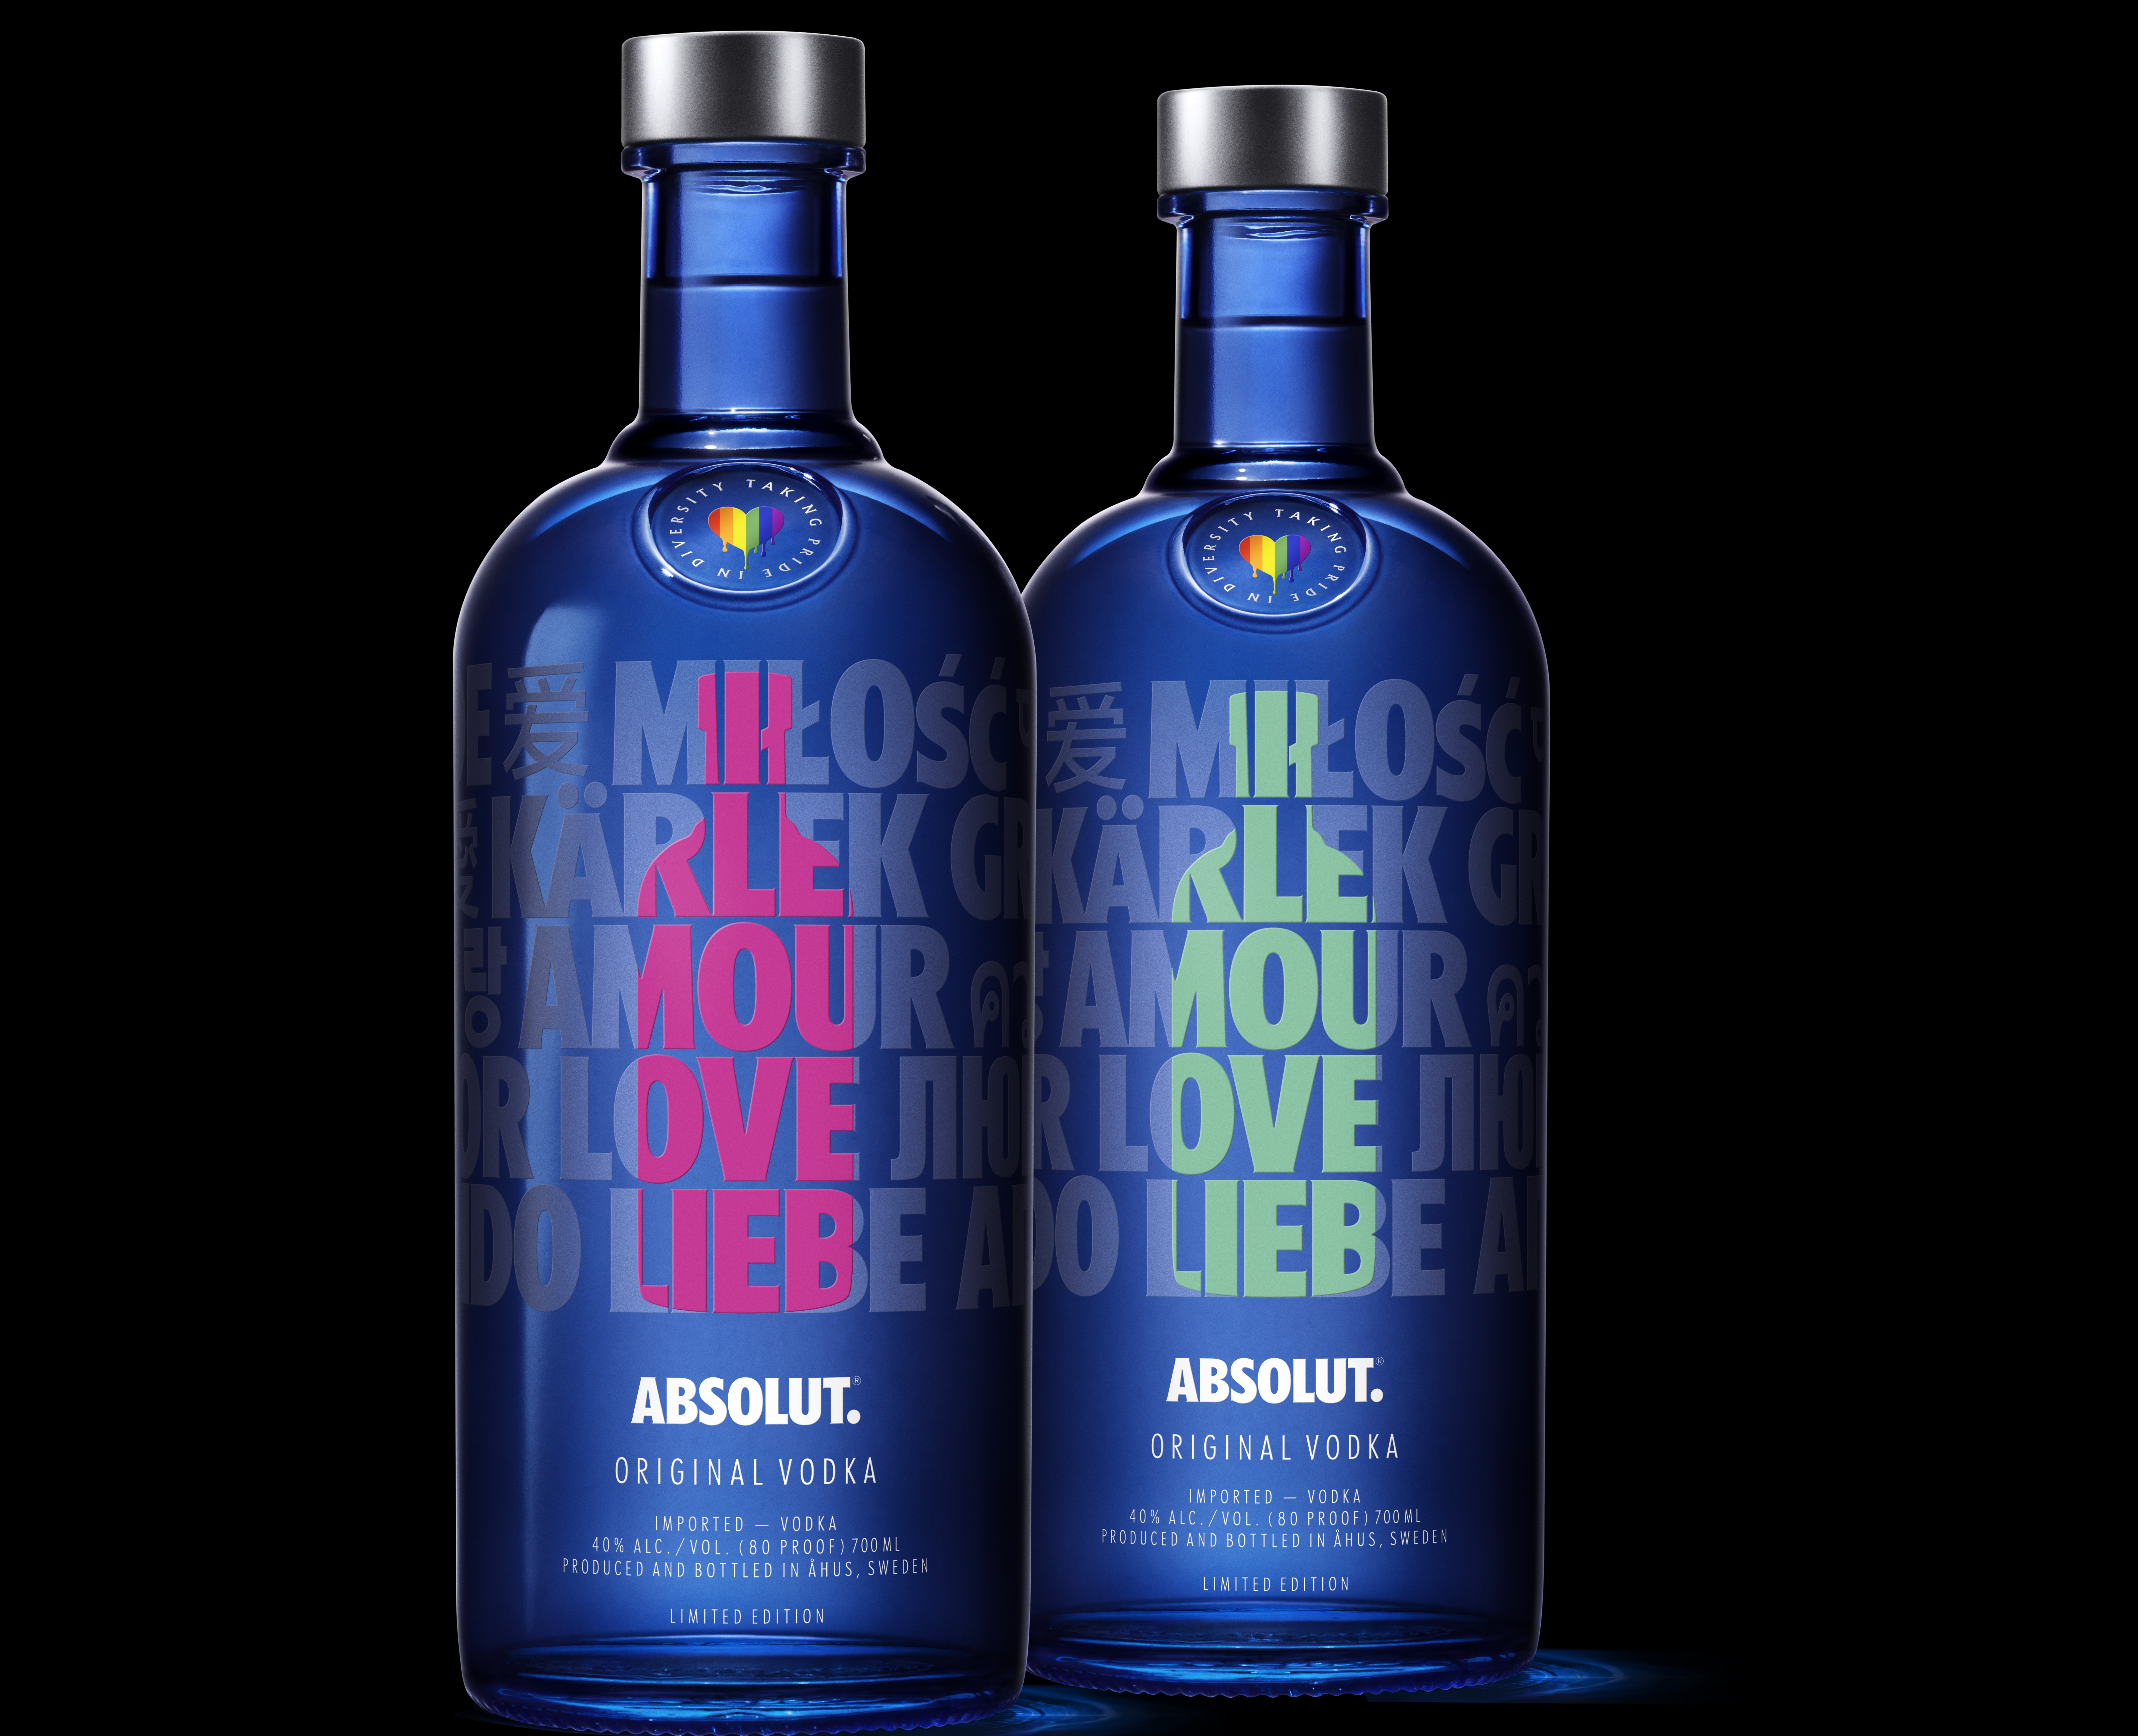 A picture of the Absolut Drop from Absolut, which is launching a campaign on how to be a better LGBT ally.